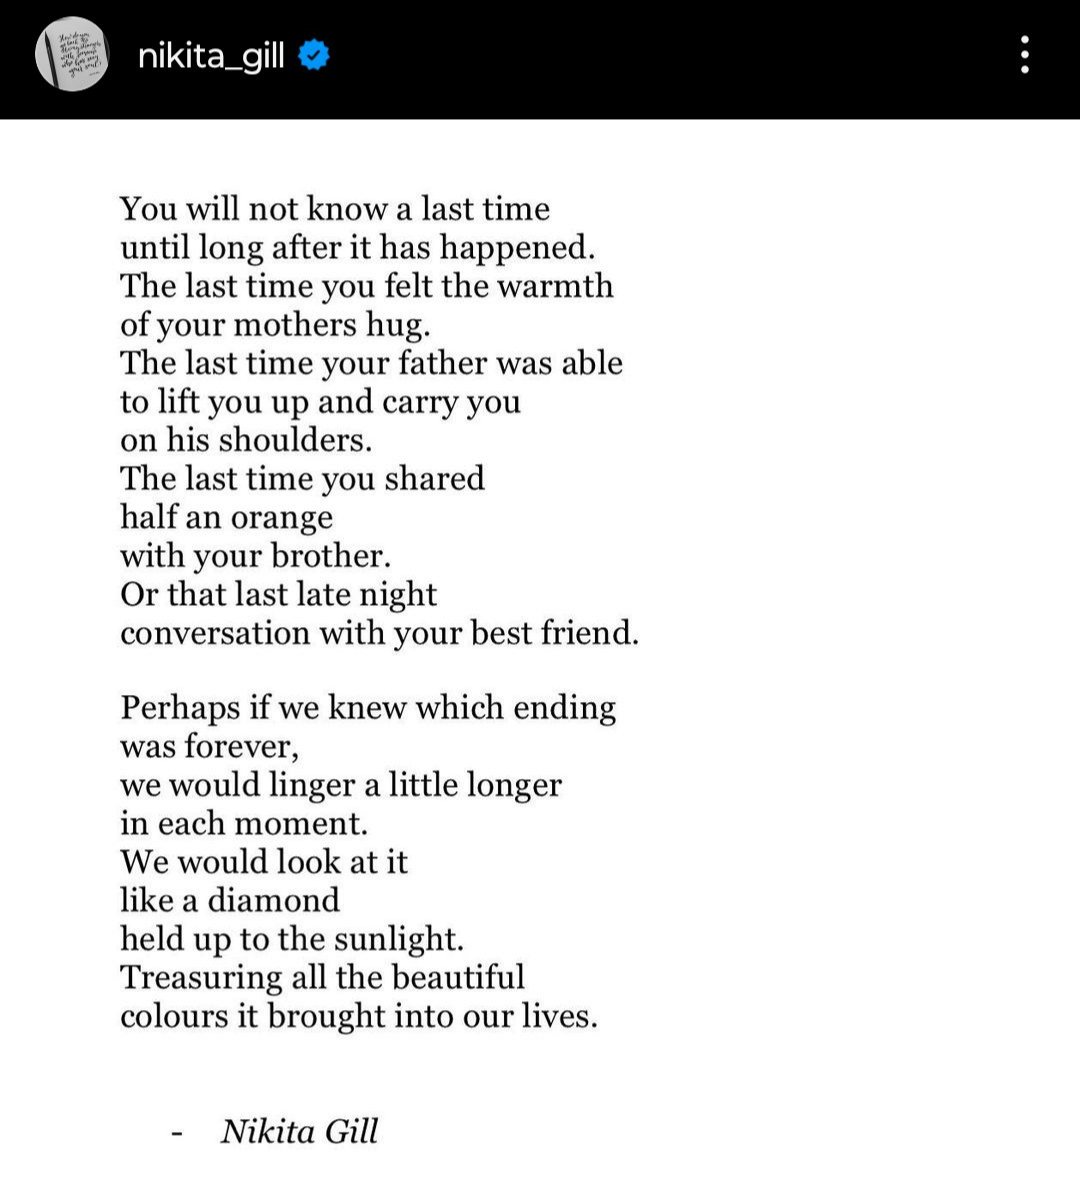 This one hit hard... bringing back all the if onlys when life (or death) snatched away something or someone you'd assumed you had for a lot longer 'Perhaps if we knew which ending was forever, we would linger a little longer in each moment.' And yet when you know it's the last